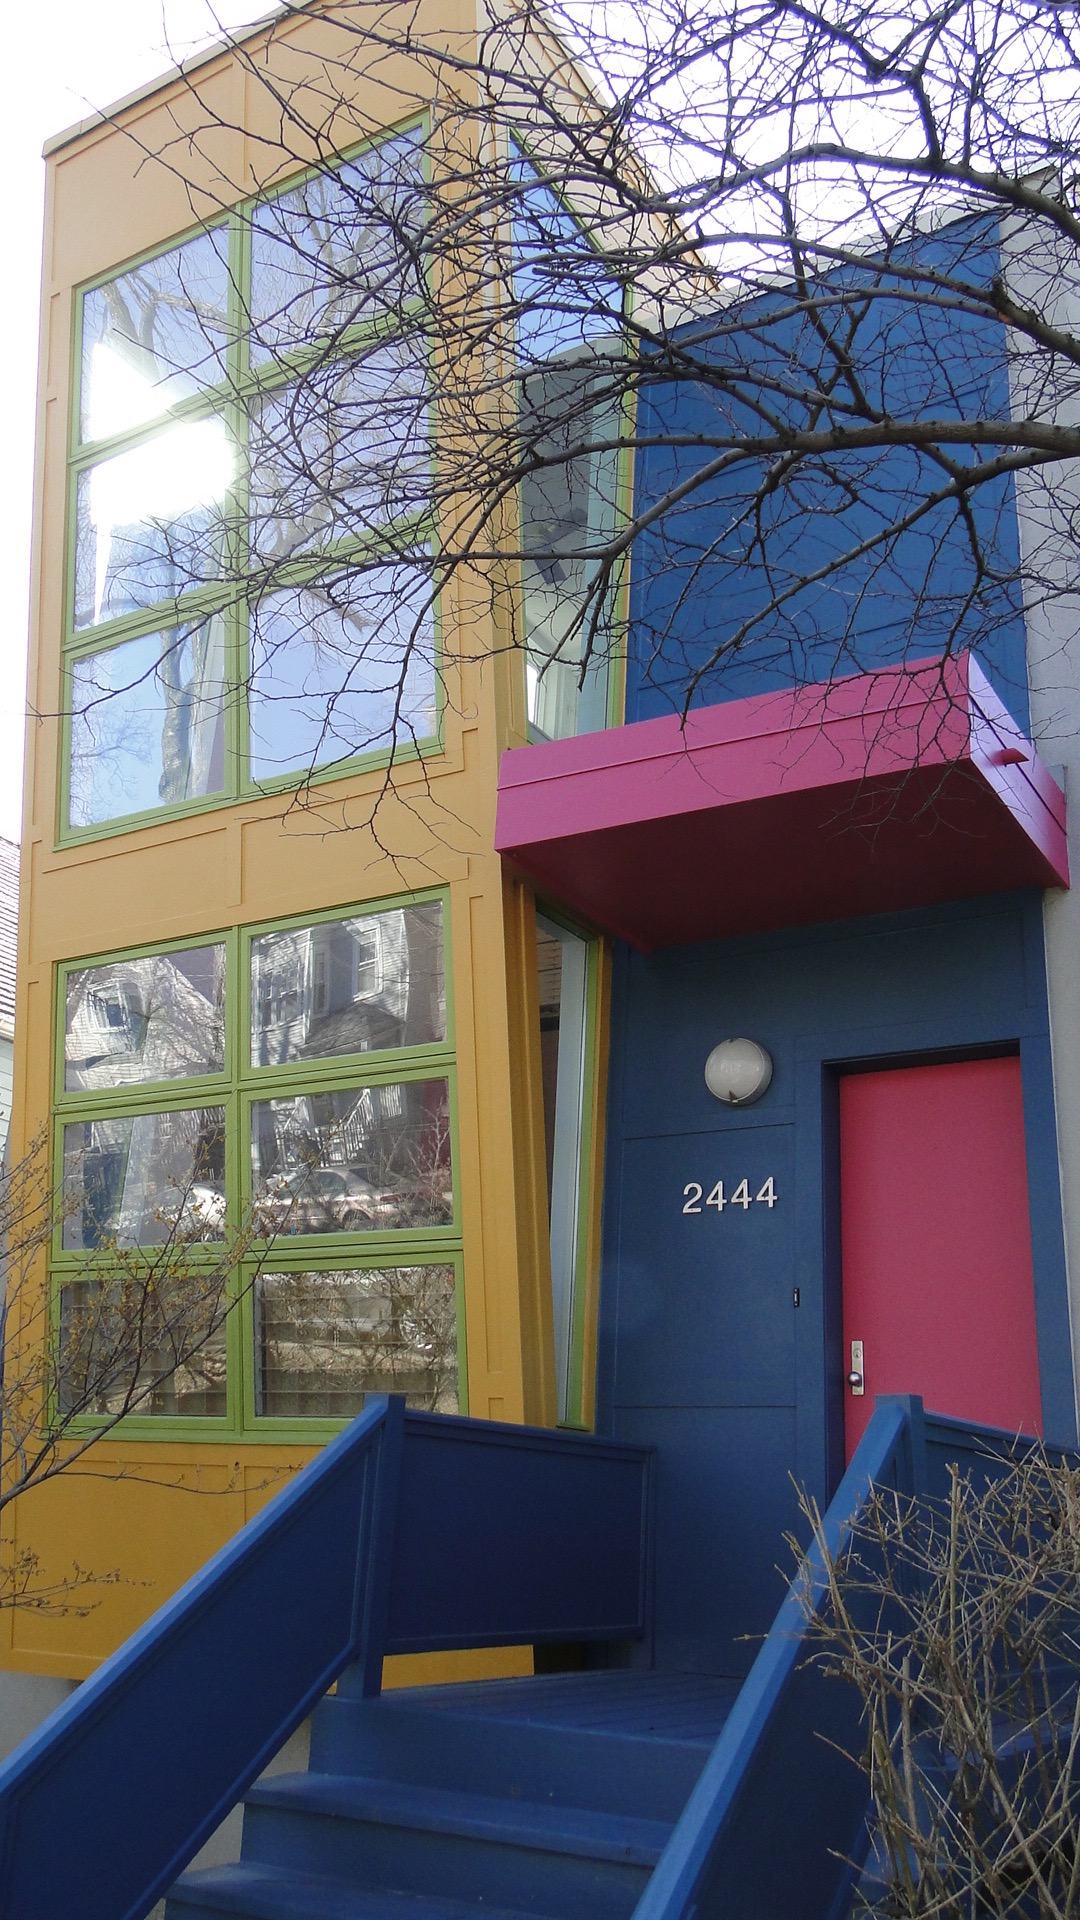 Owners Of Chicago's 'Little Pink Houses' On Why They Made The Bold Choice